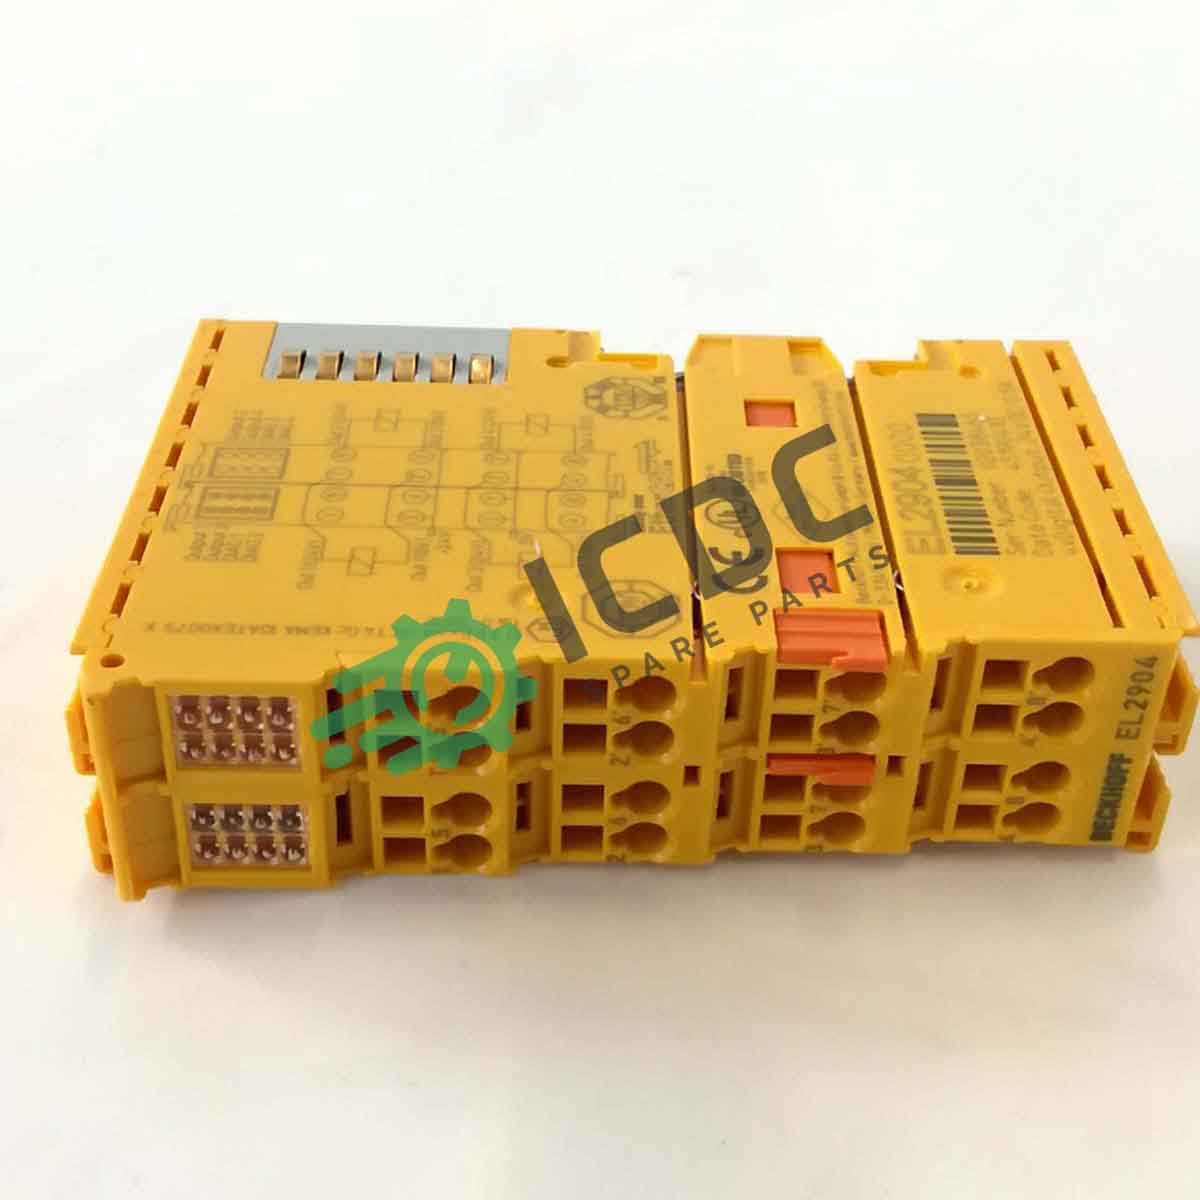 1pcs NEW BECKHOFF EL2904 PLC module Brand new unused DHL Fast delivery 